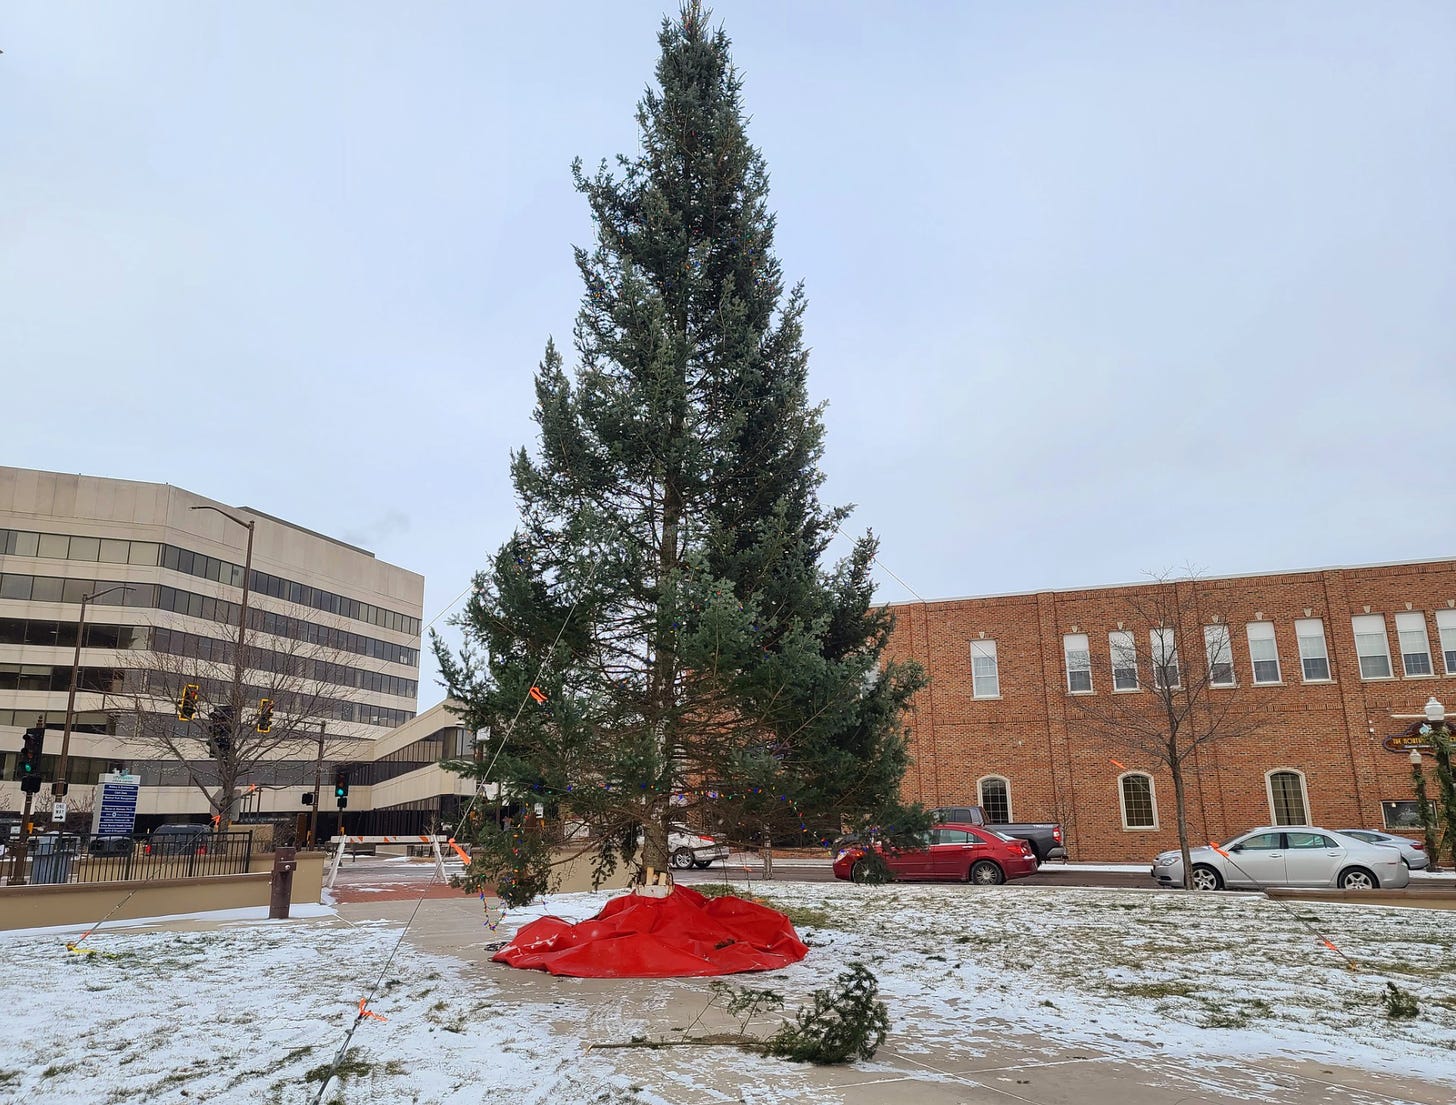 A tall pine christmas tree in the town square during the day. Broken branches are on the ground, a red blanket is wrapped around the base. The photo is taken from a low angle with a flat grey sky in the background. This tree had fallen, but now is upright being held in place by cables stake in around it.